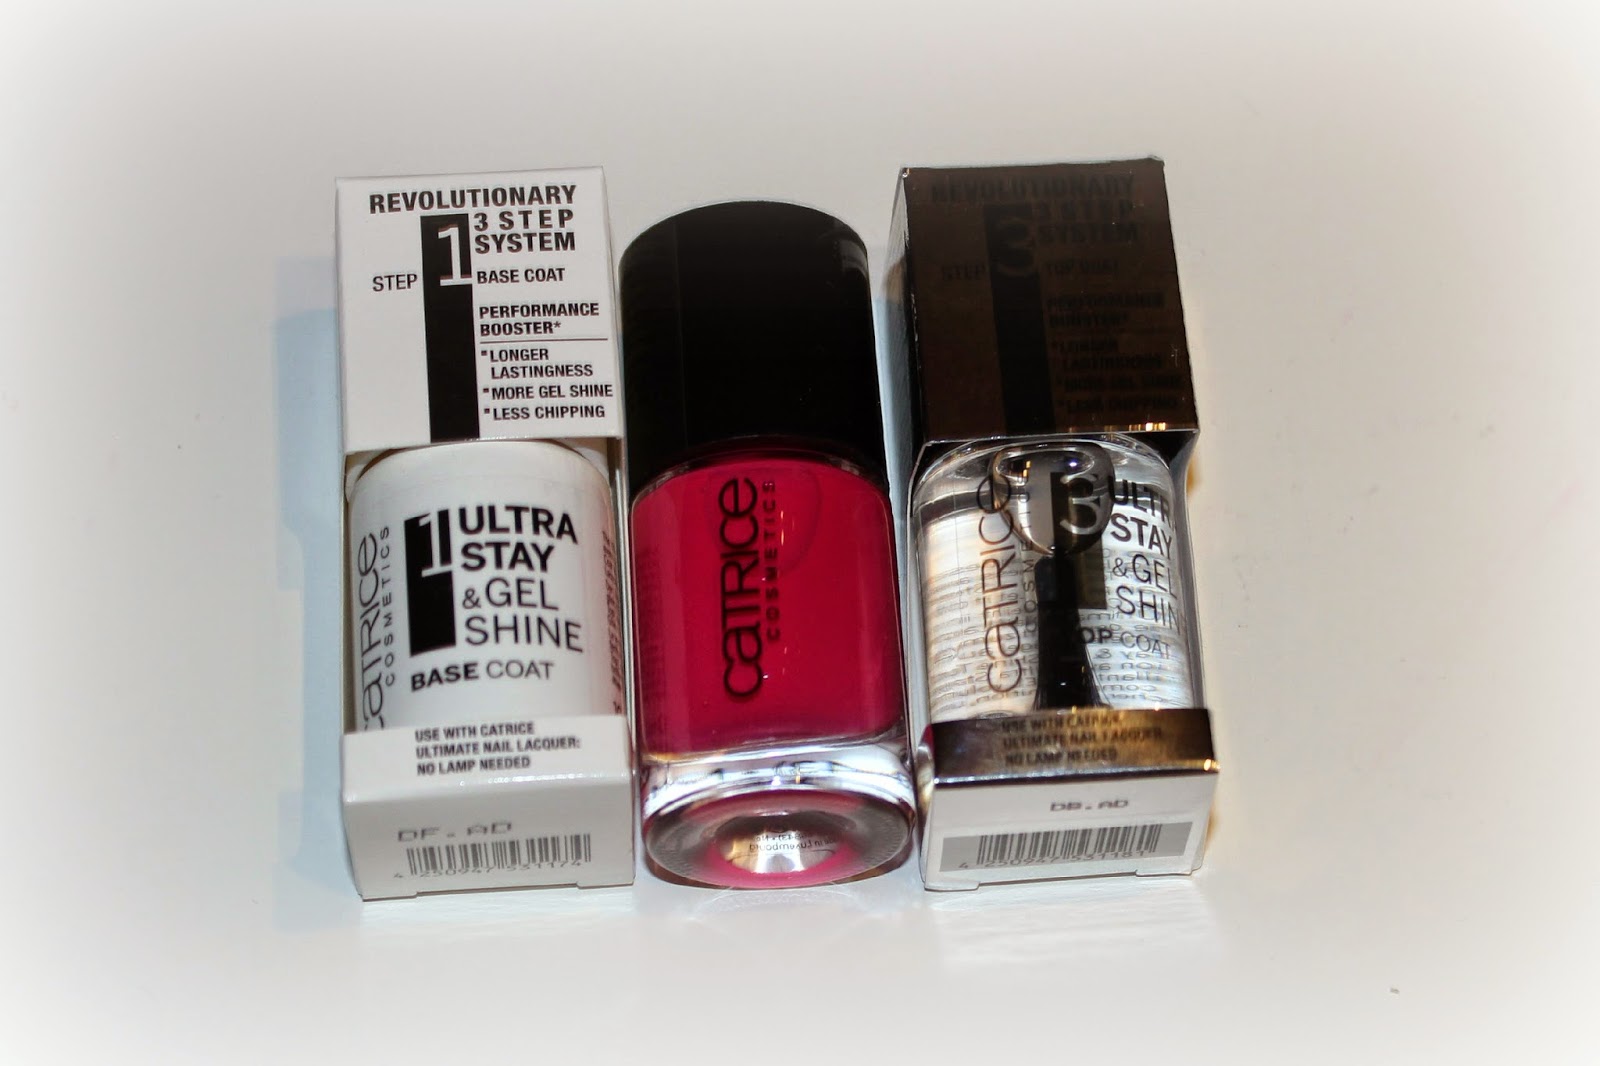 Liebling: & Step 3 Ultra Lia System Stay Shine Catrice Gel